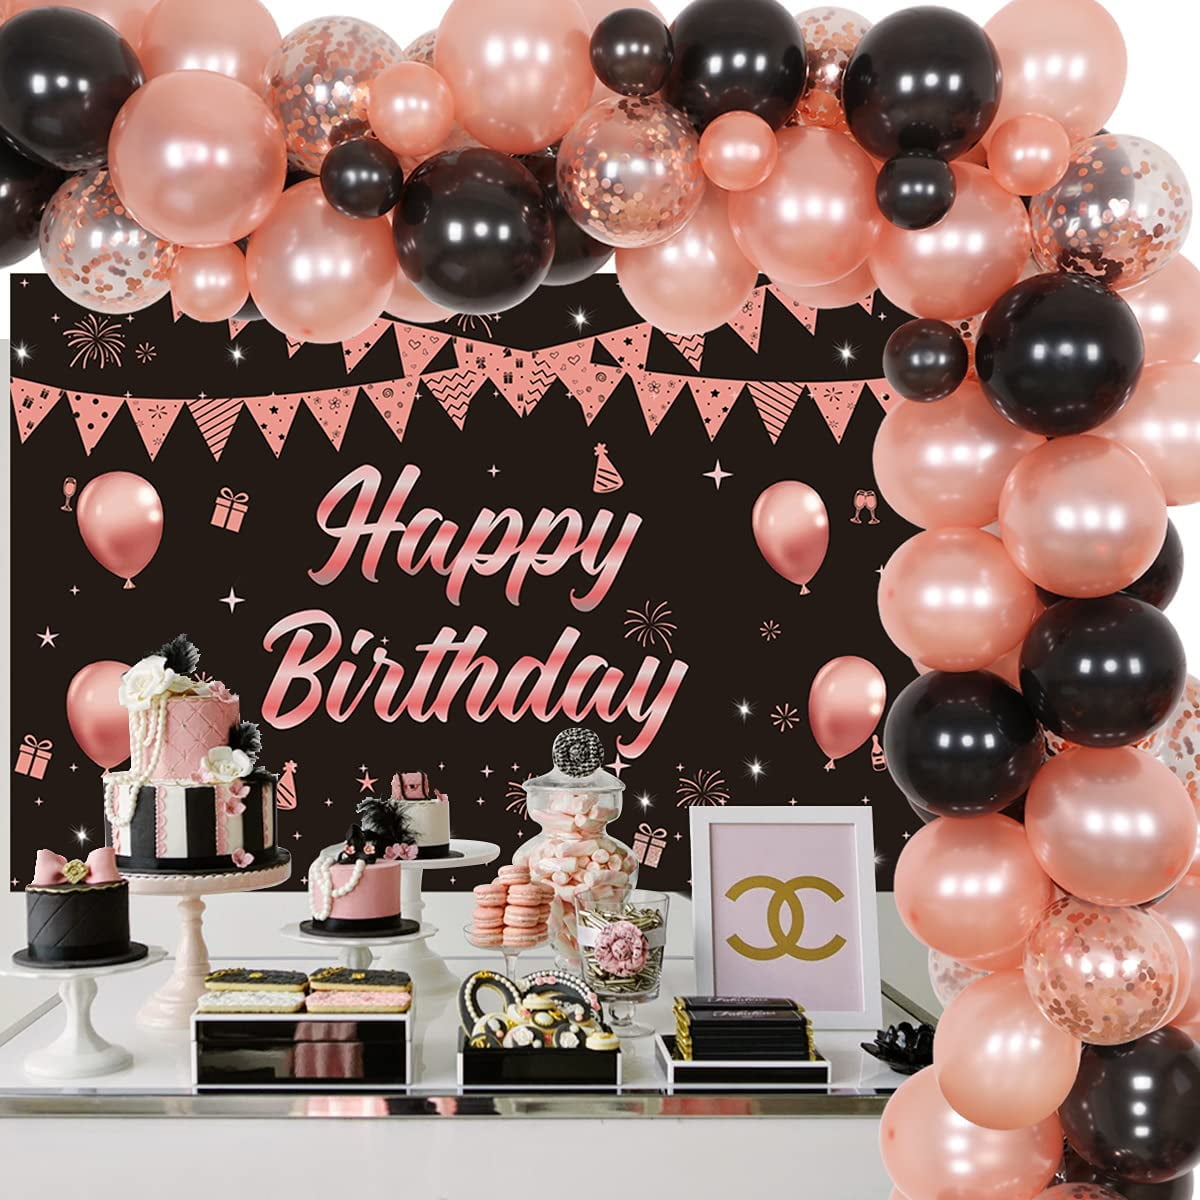 Black and Rose Gold Birthday Decorations - Rose Gold Black Balloon Garland  Kit Happy Birthday Backdrop for Women Girls Sweet 16th/18th/30th/40th/50th